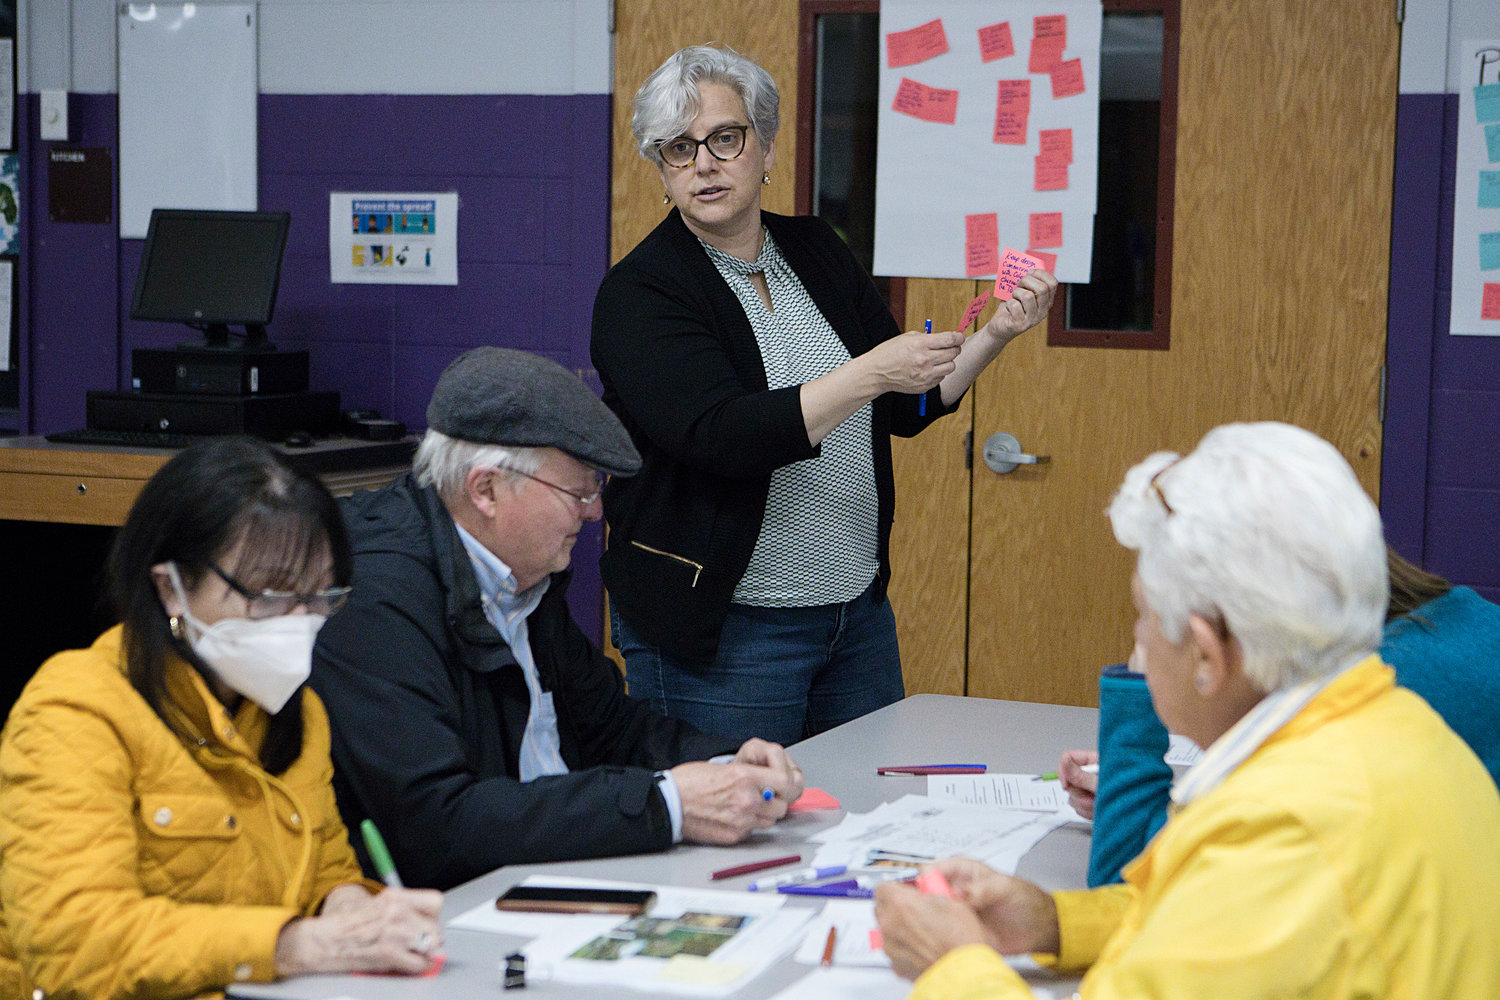 Kristin Read discusses design ideas with a group during the "Design Charette" for the Burr's Hill Park Activity Building last Wednesday.